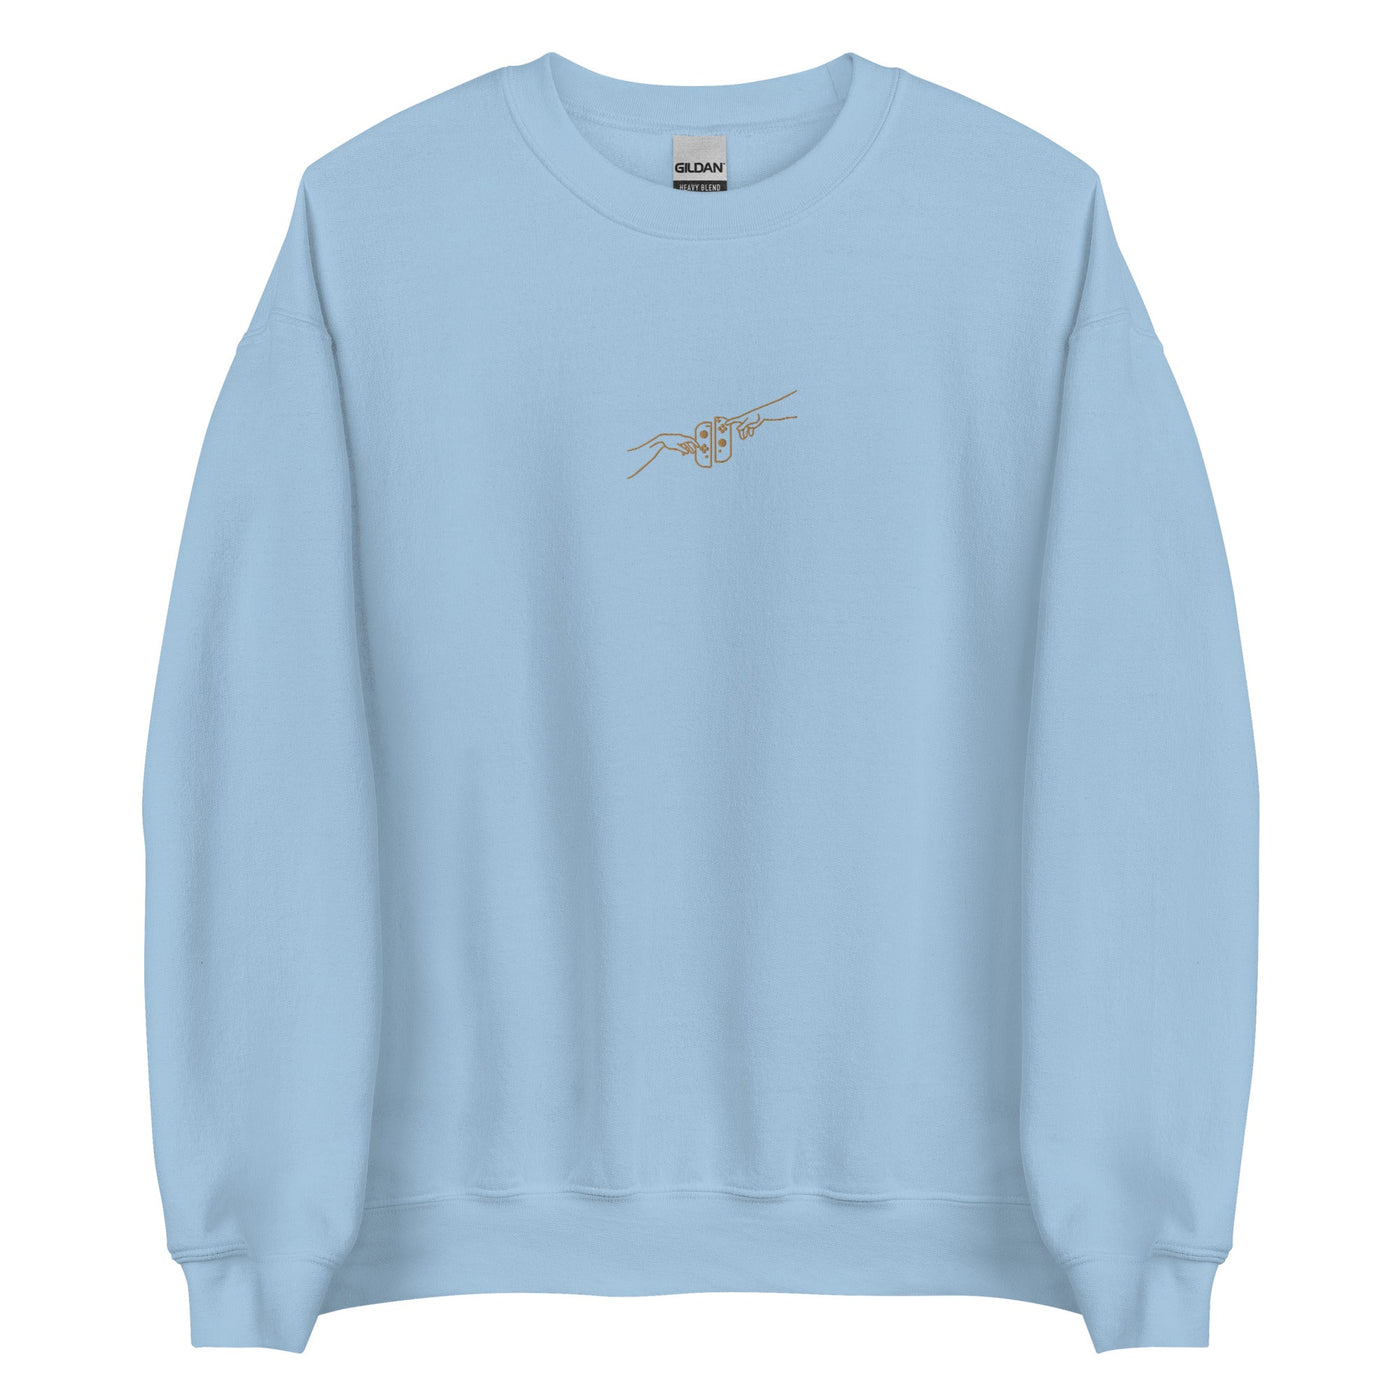 The Creation of Switch | Embroidered Unisex Sweatshirt | Cozy Gamer Threads and Thistles Inventory Light Blue S 